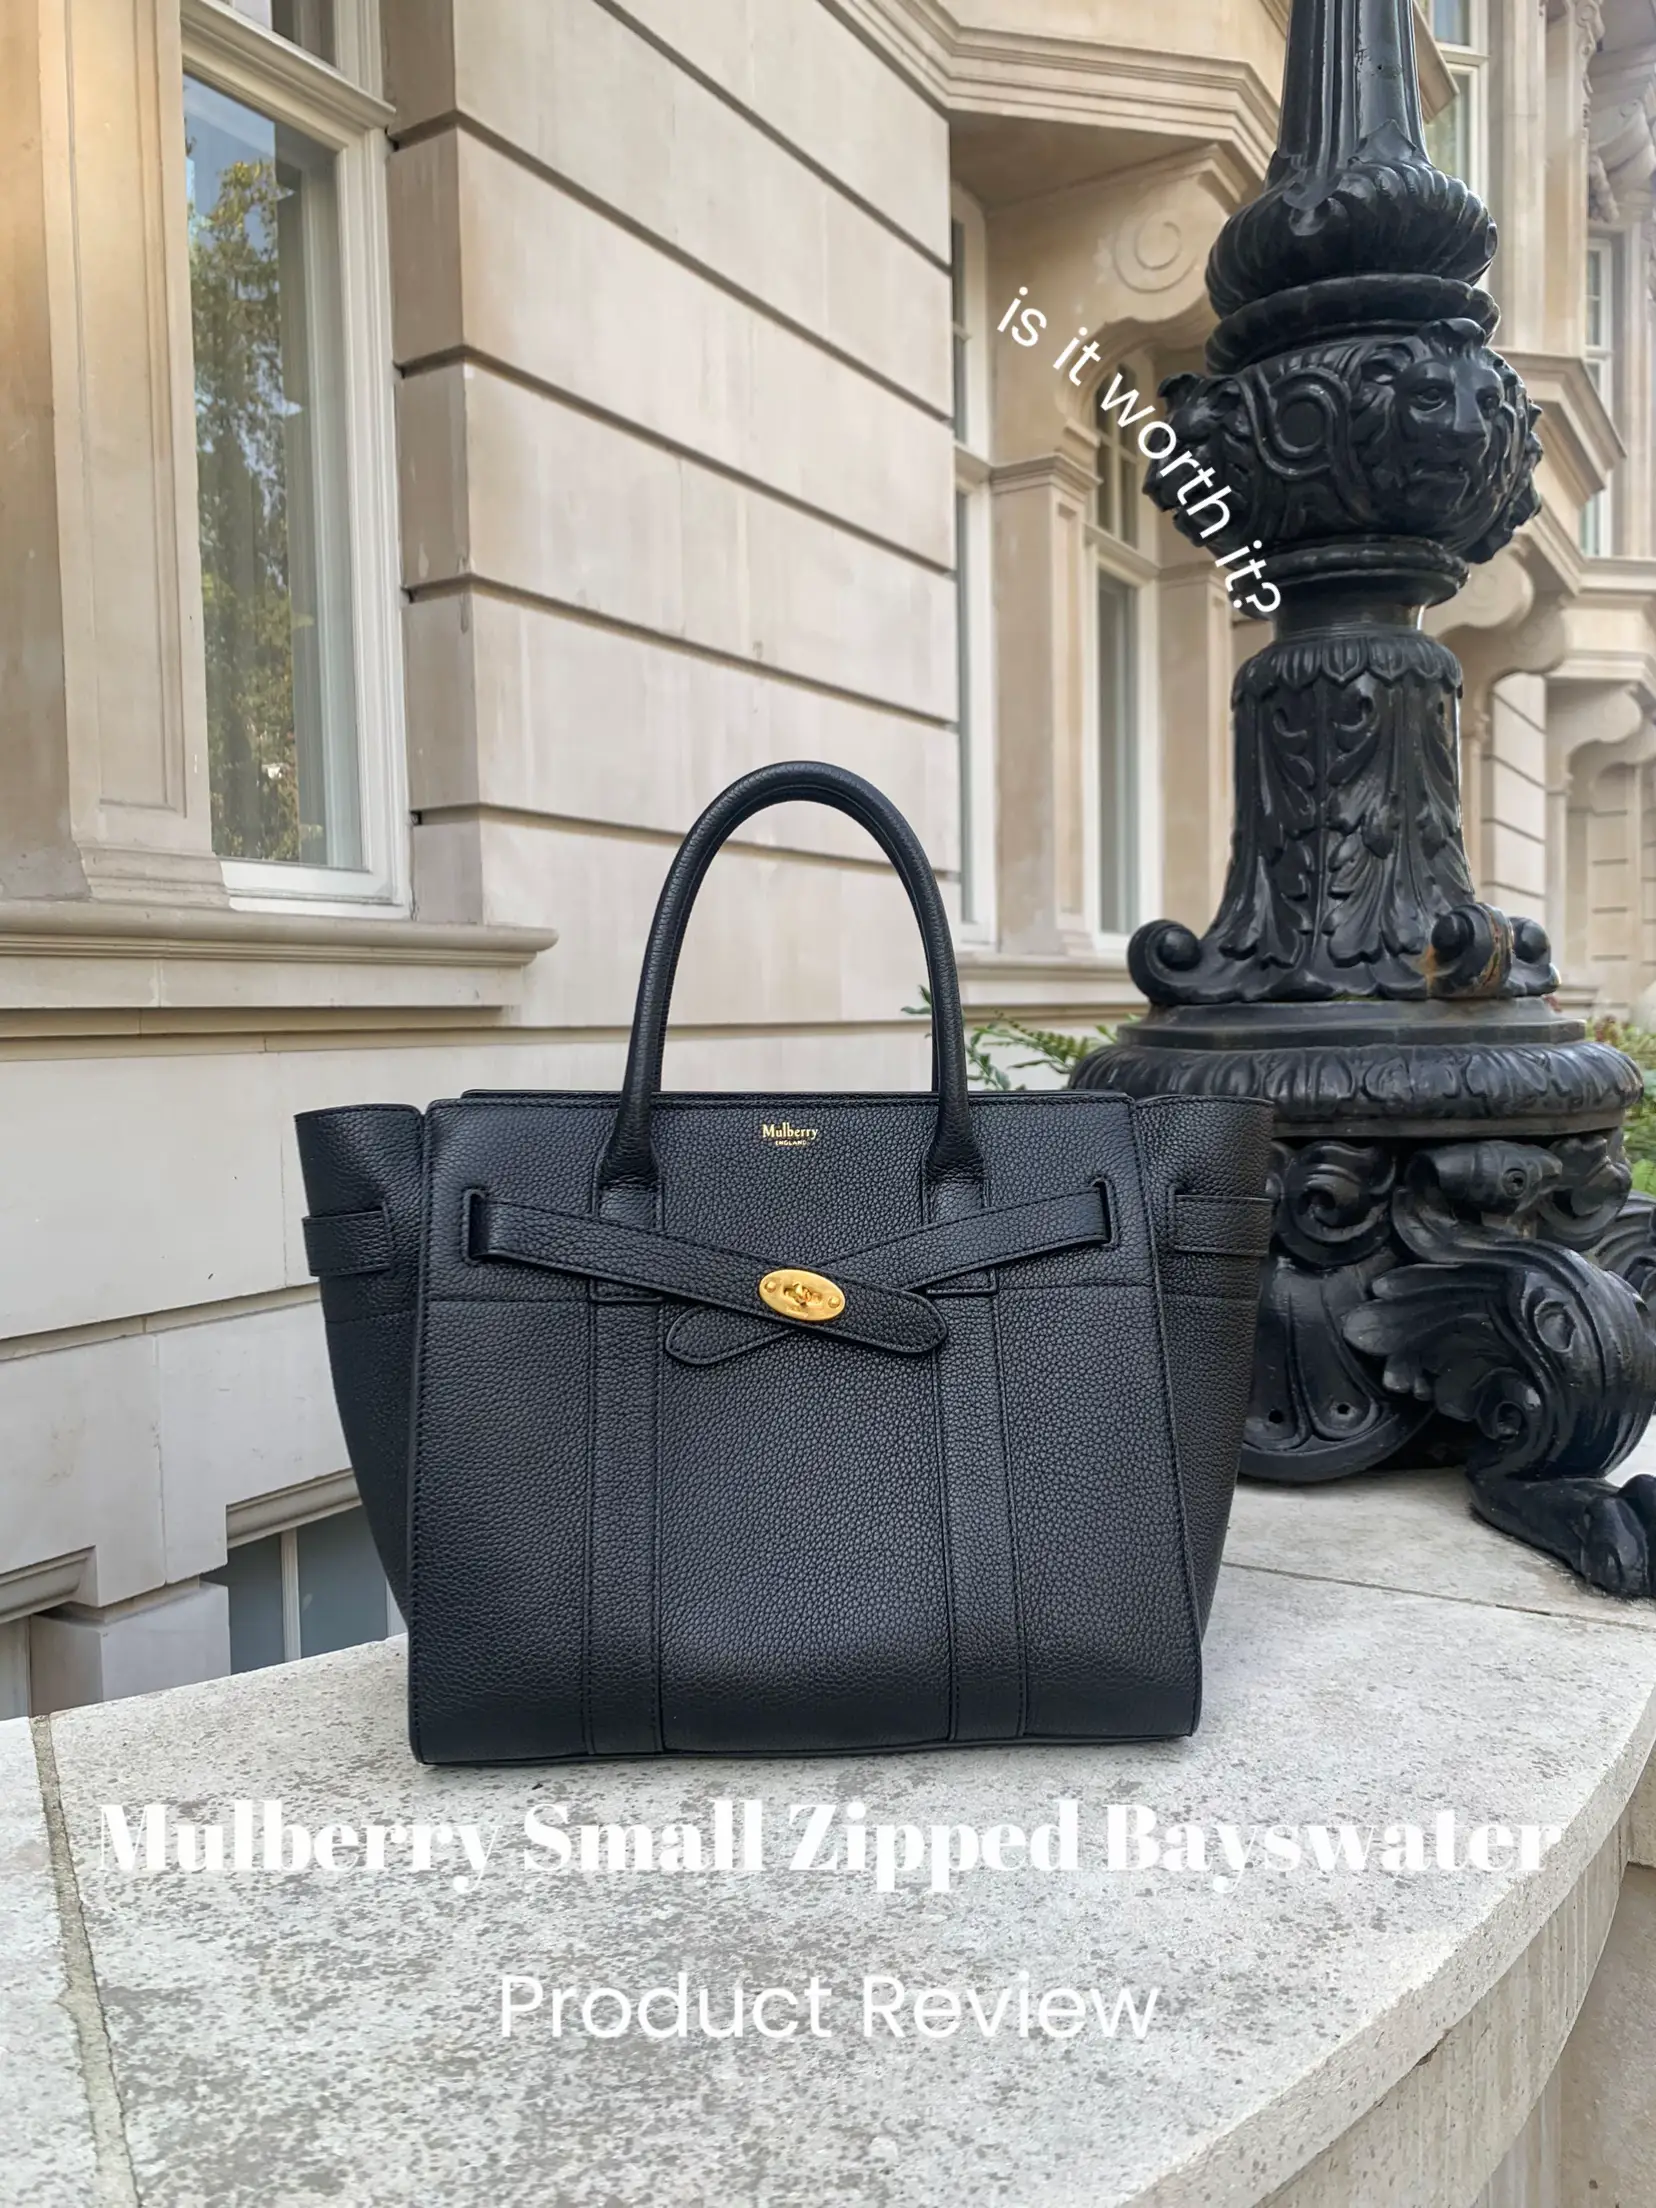 Mulberry bag, honest review, Gallery posted by Kavveeta